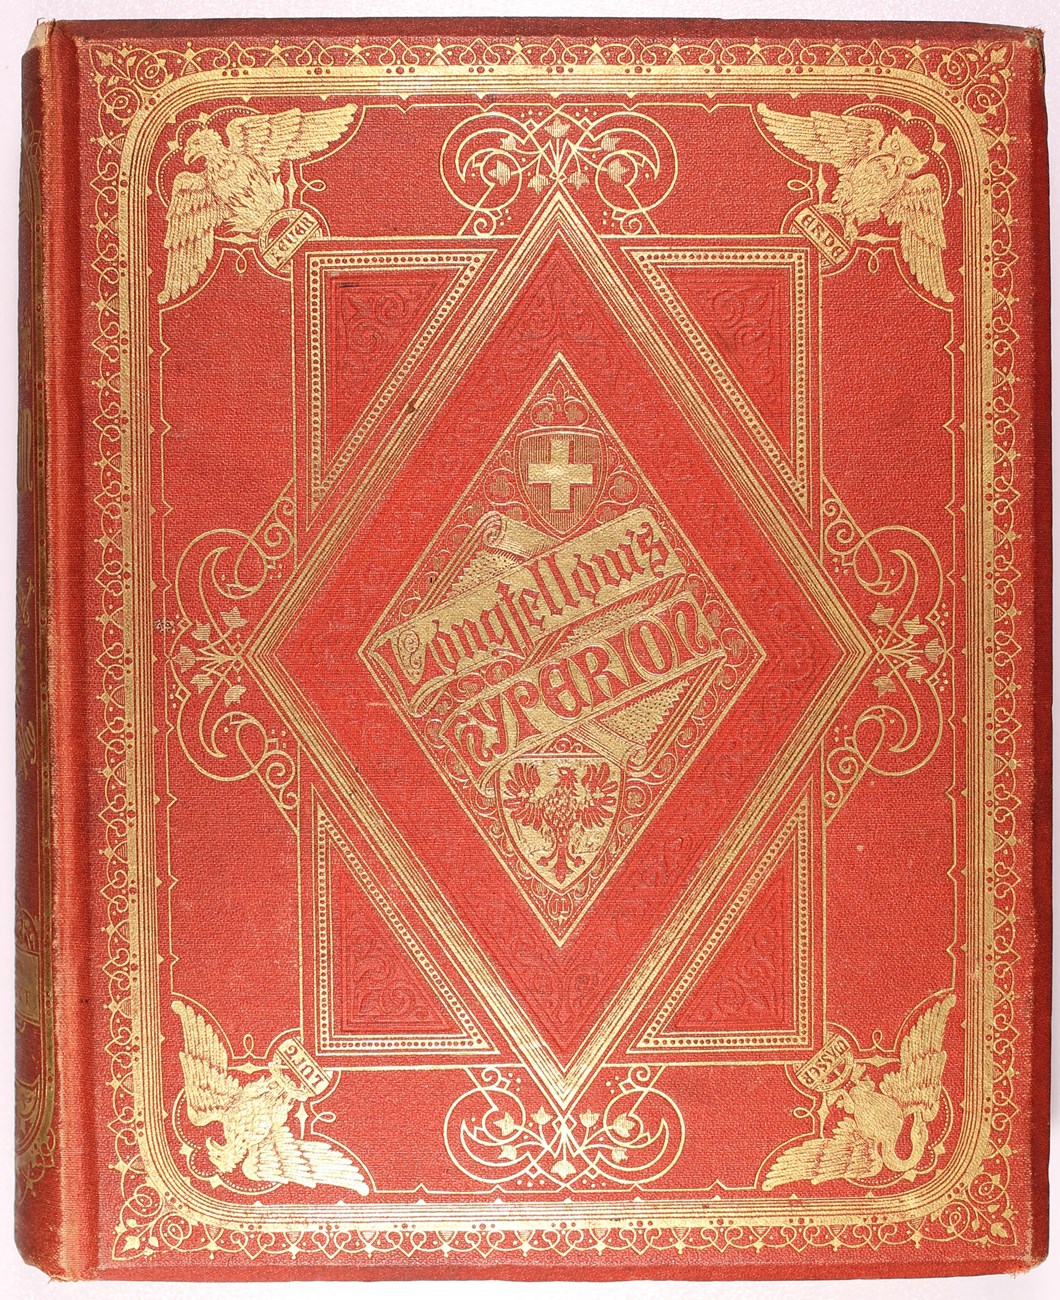 Red bound book, gold lettering, "Hyperion" by Longfellow